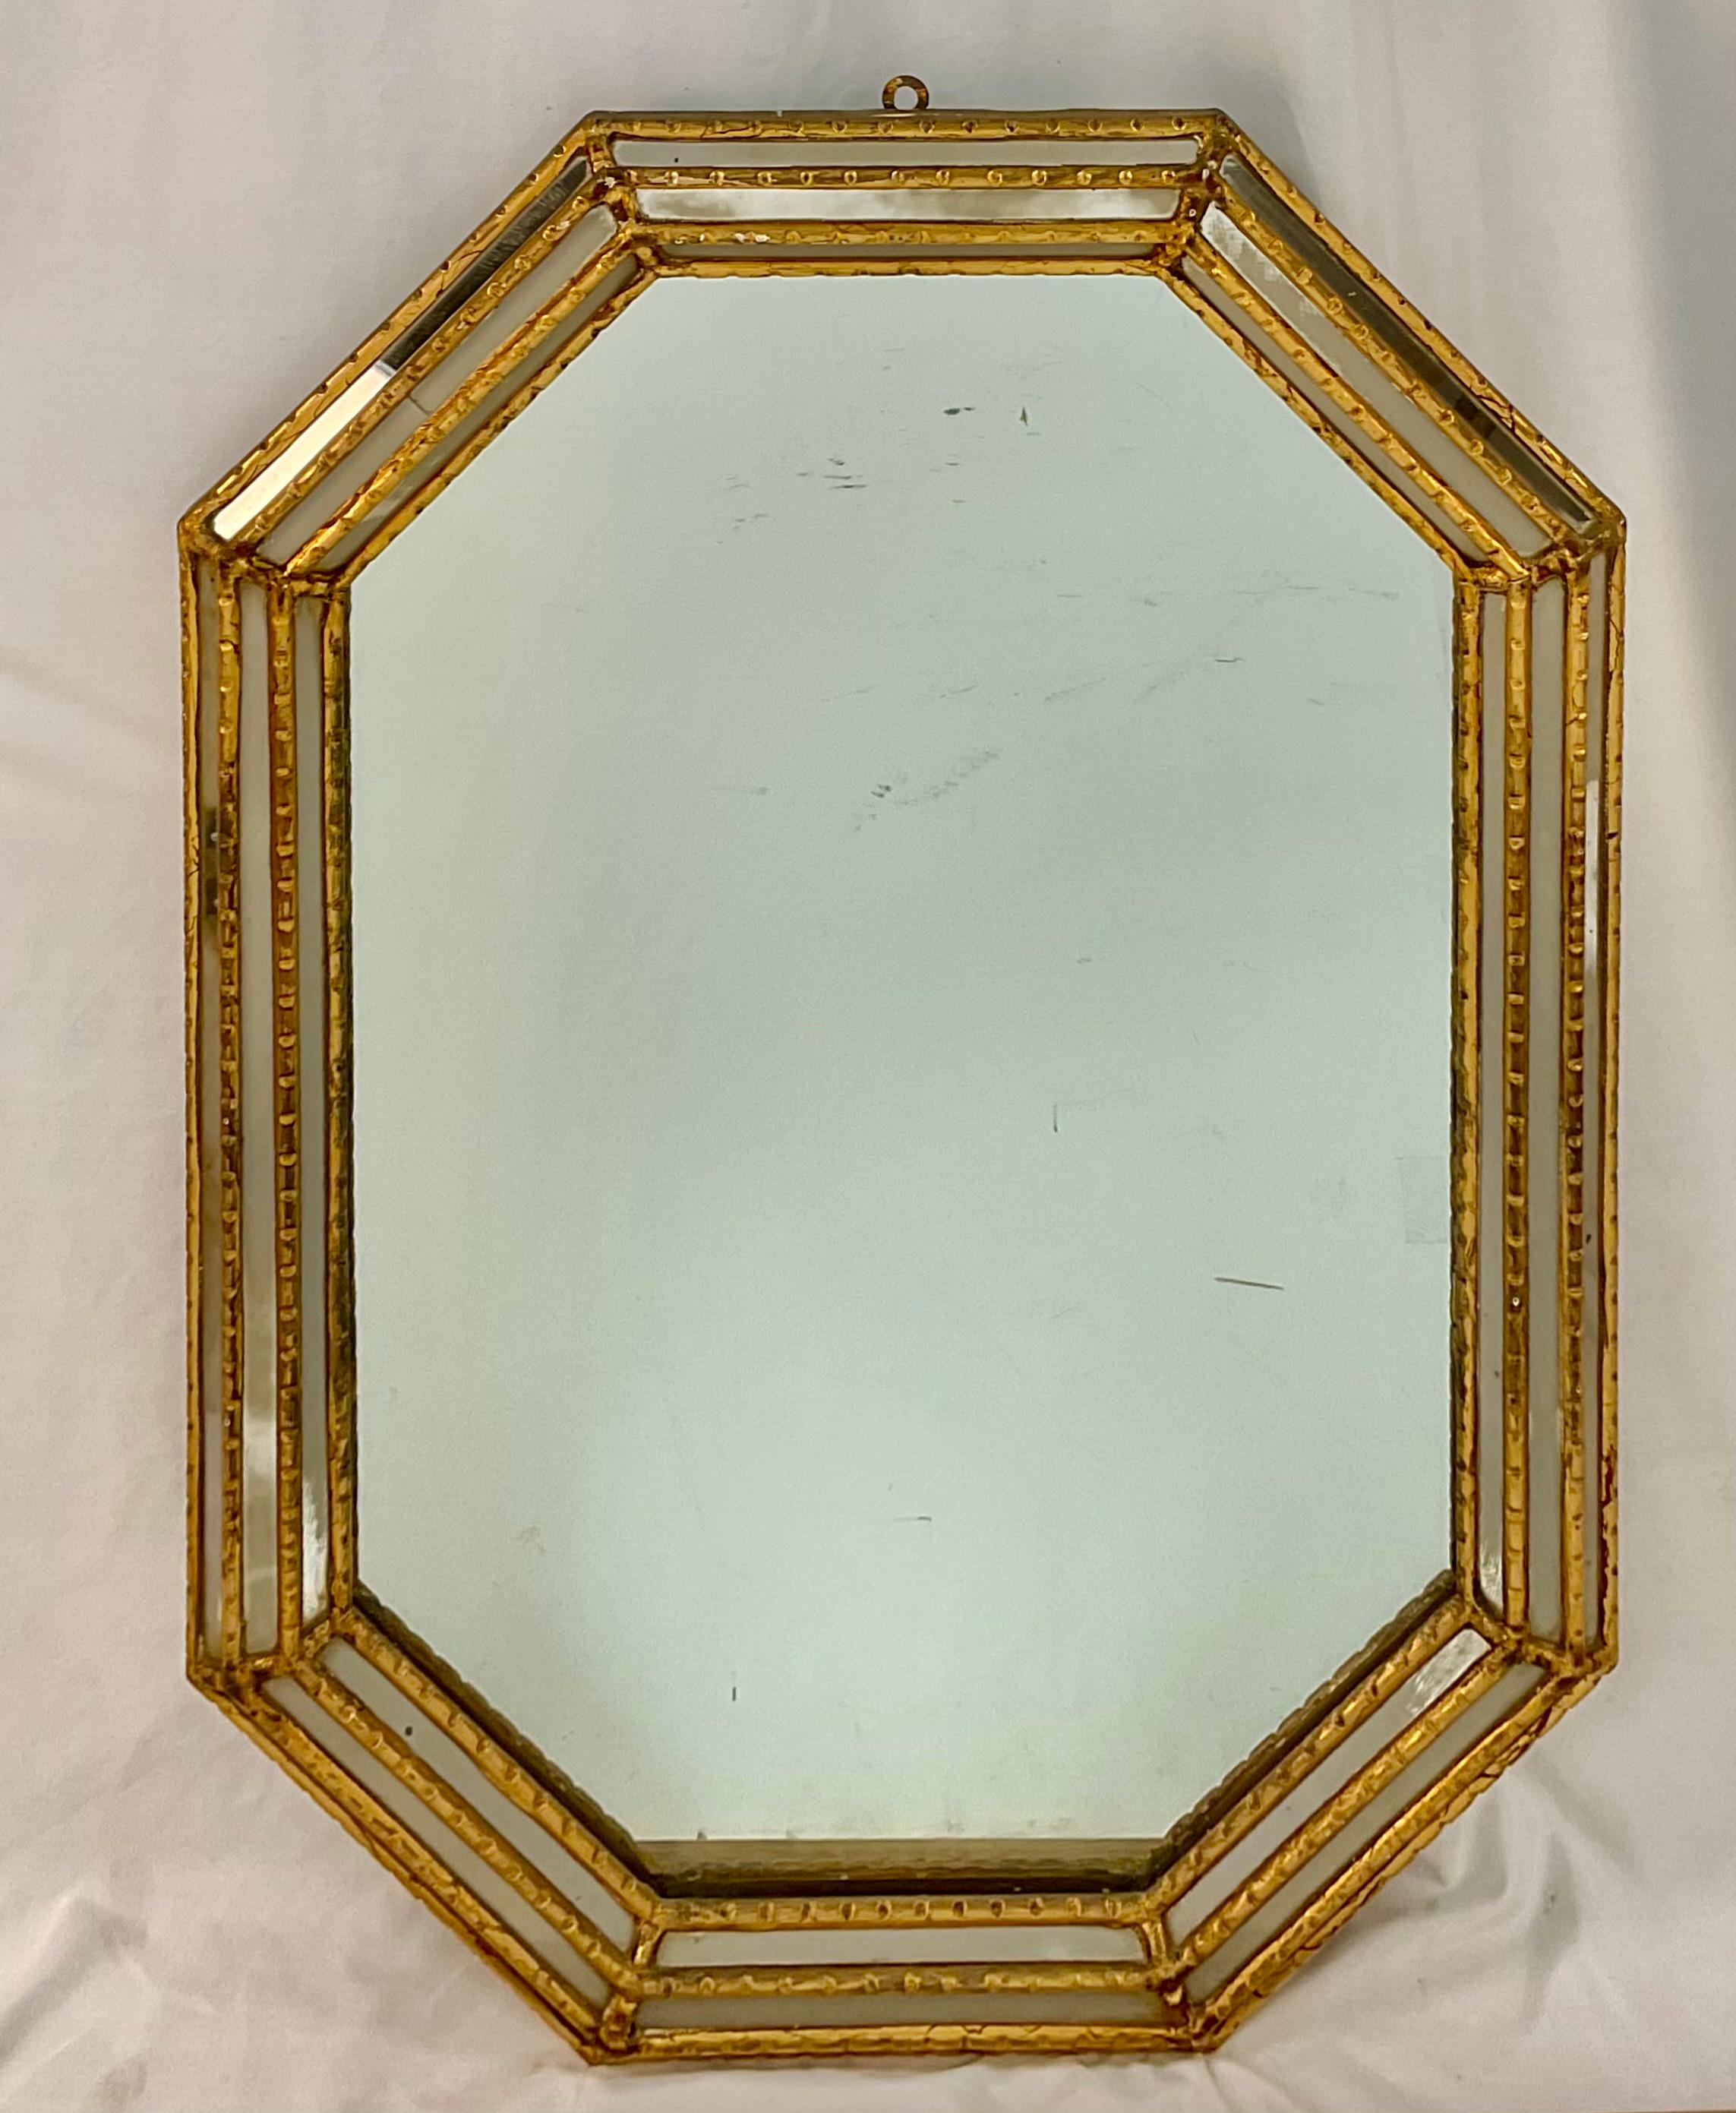 Early 20th century Venetian hexagon shaped wall mirror. Frame is giltwood with narrow mirrored inserts. 